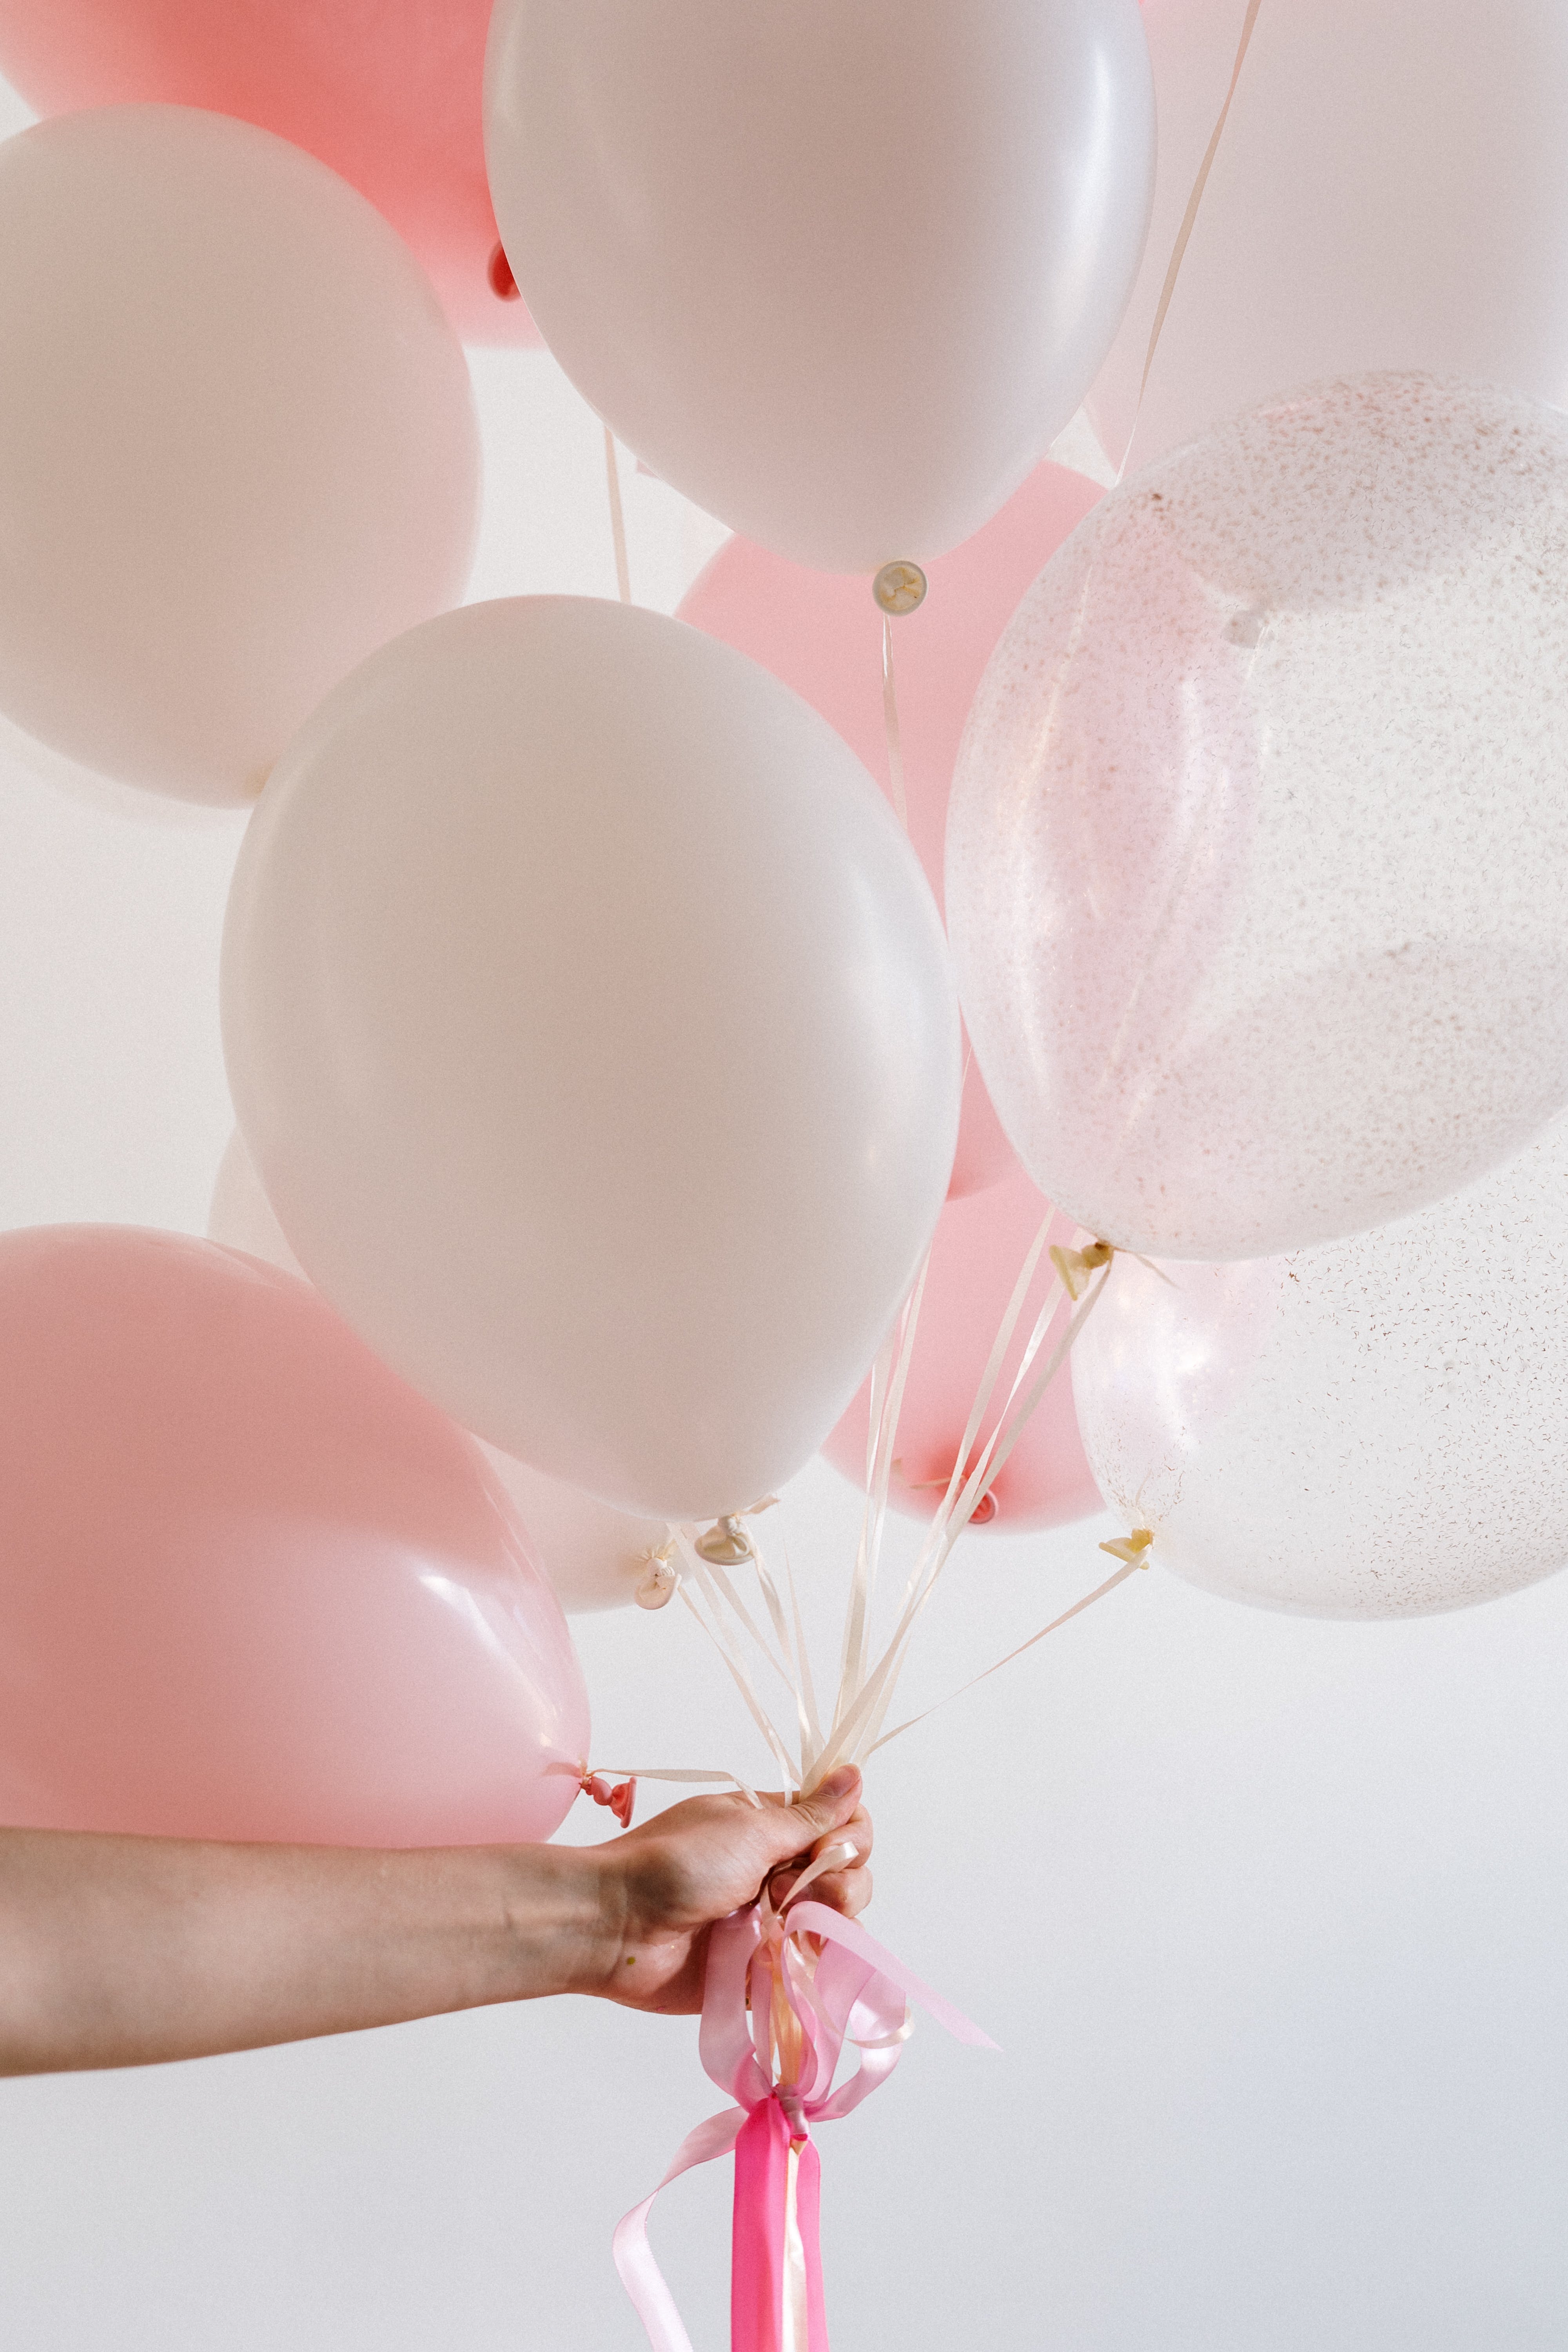 Bouquet of Pink Balloons held